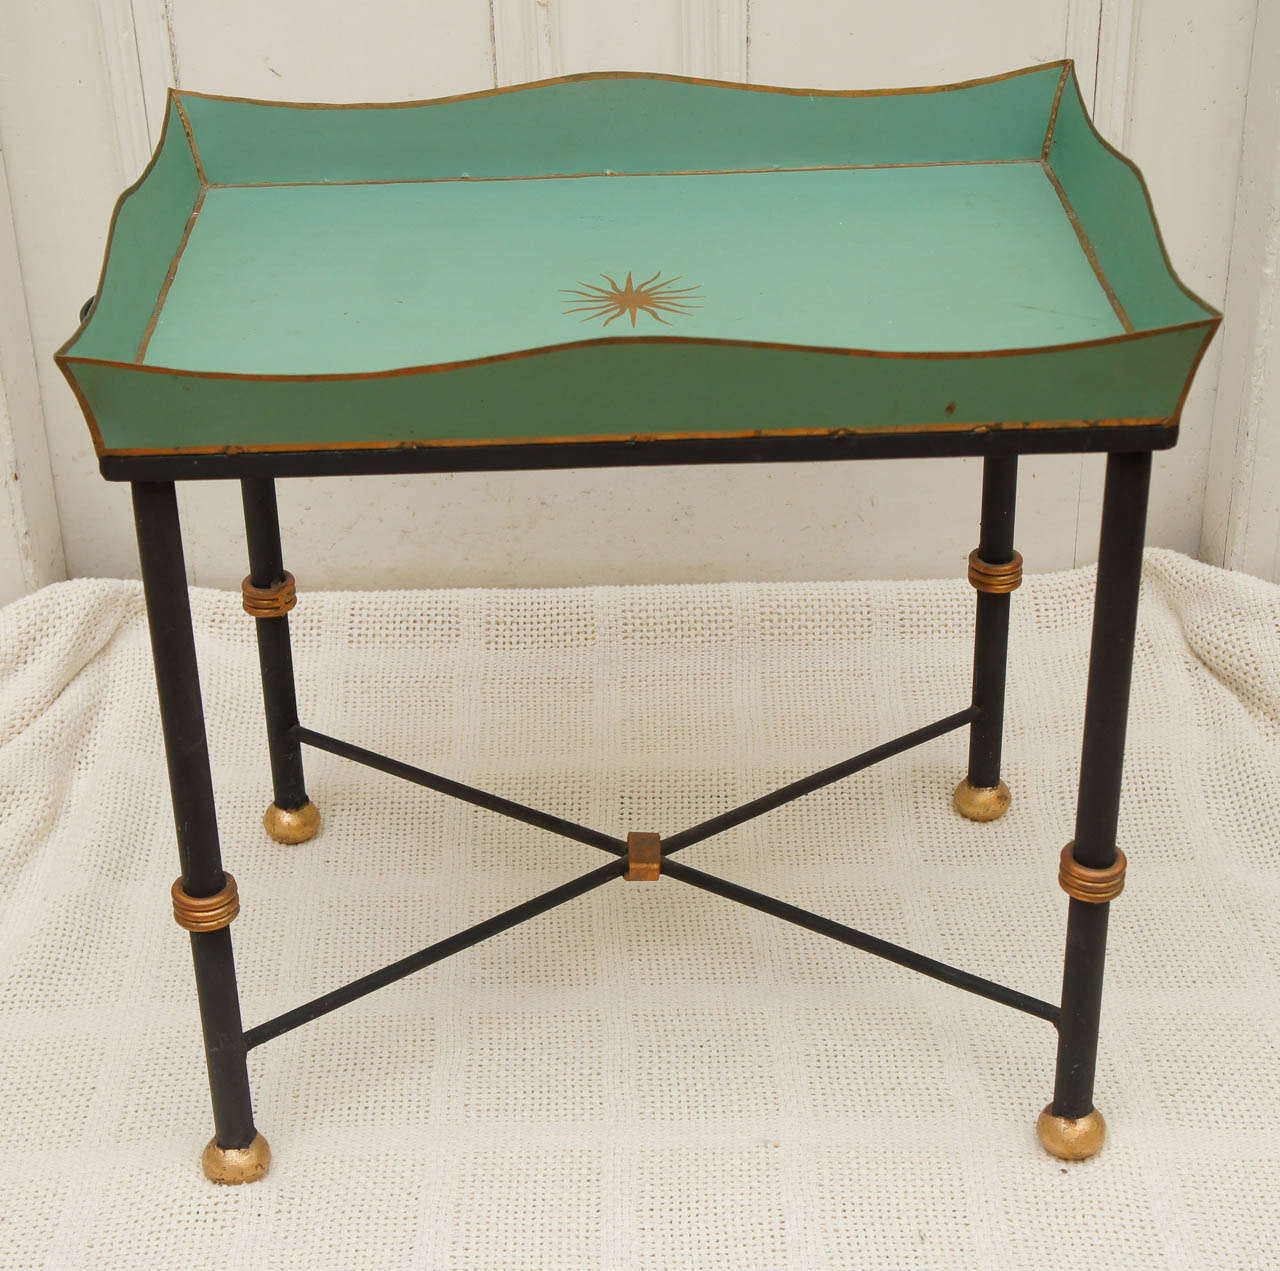 Green tole tray with gold decoration on cast iron base with gold knobs and iron handles on either side of tray for carrying. Briger Design. Gold sunburst star in the center of tray.   Height measurement is to the rim of the tray.  Nice size and easy